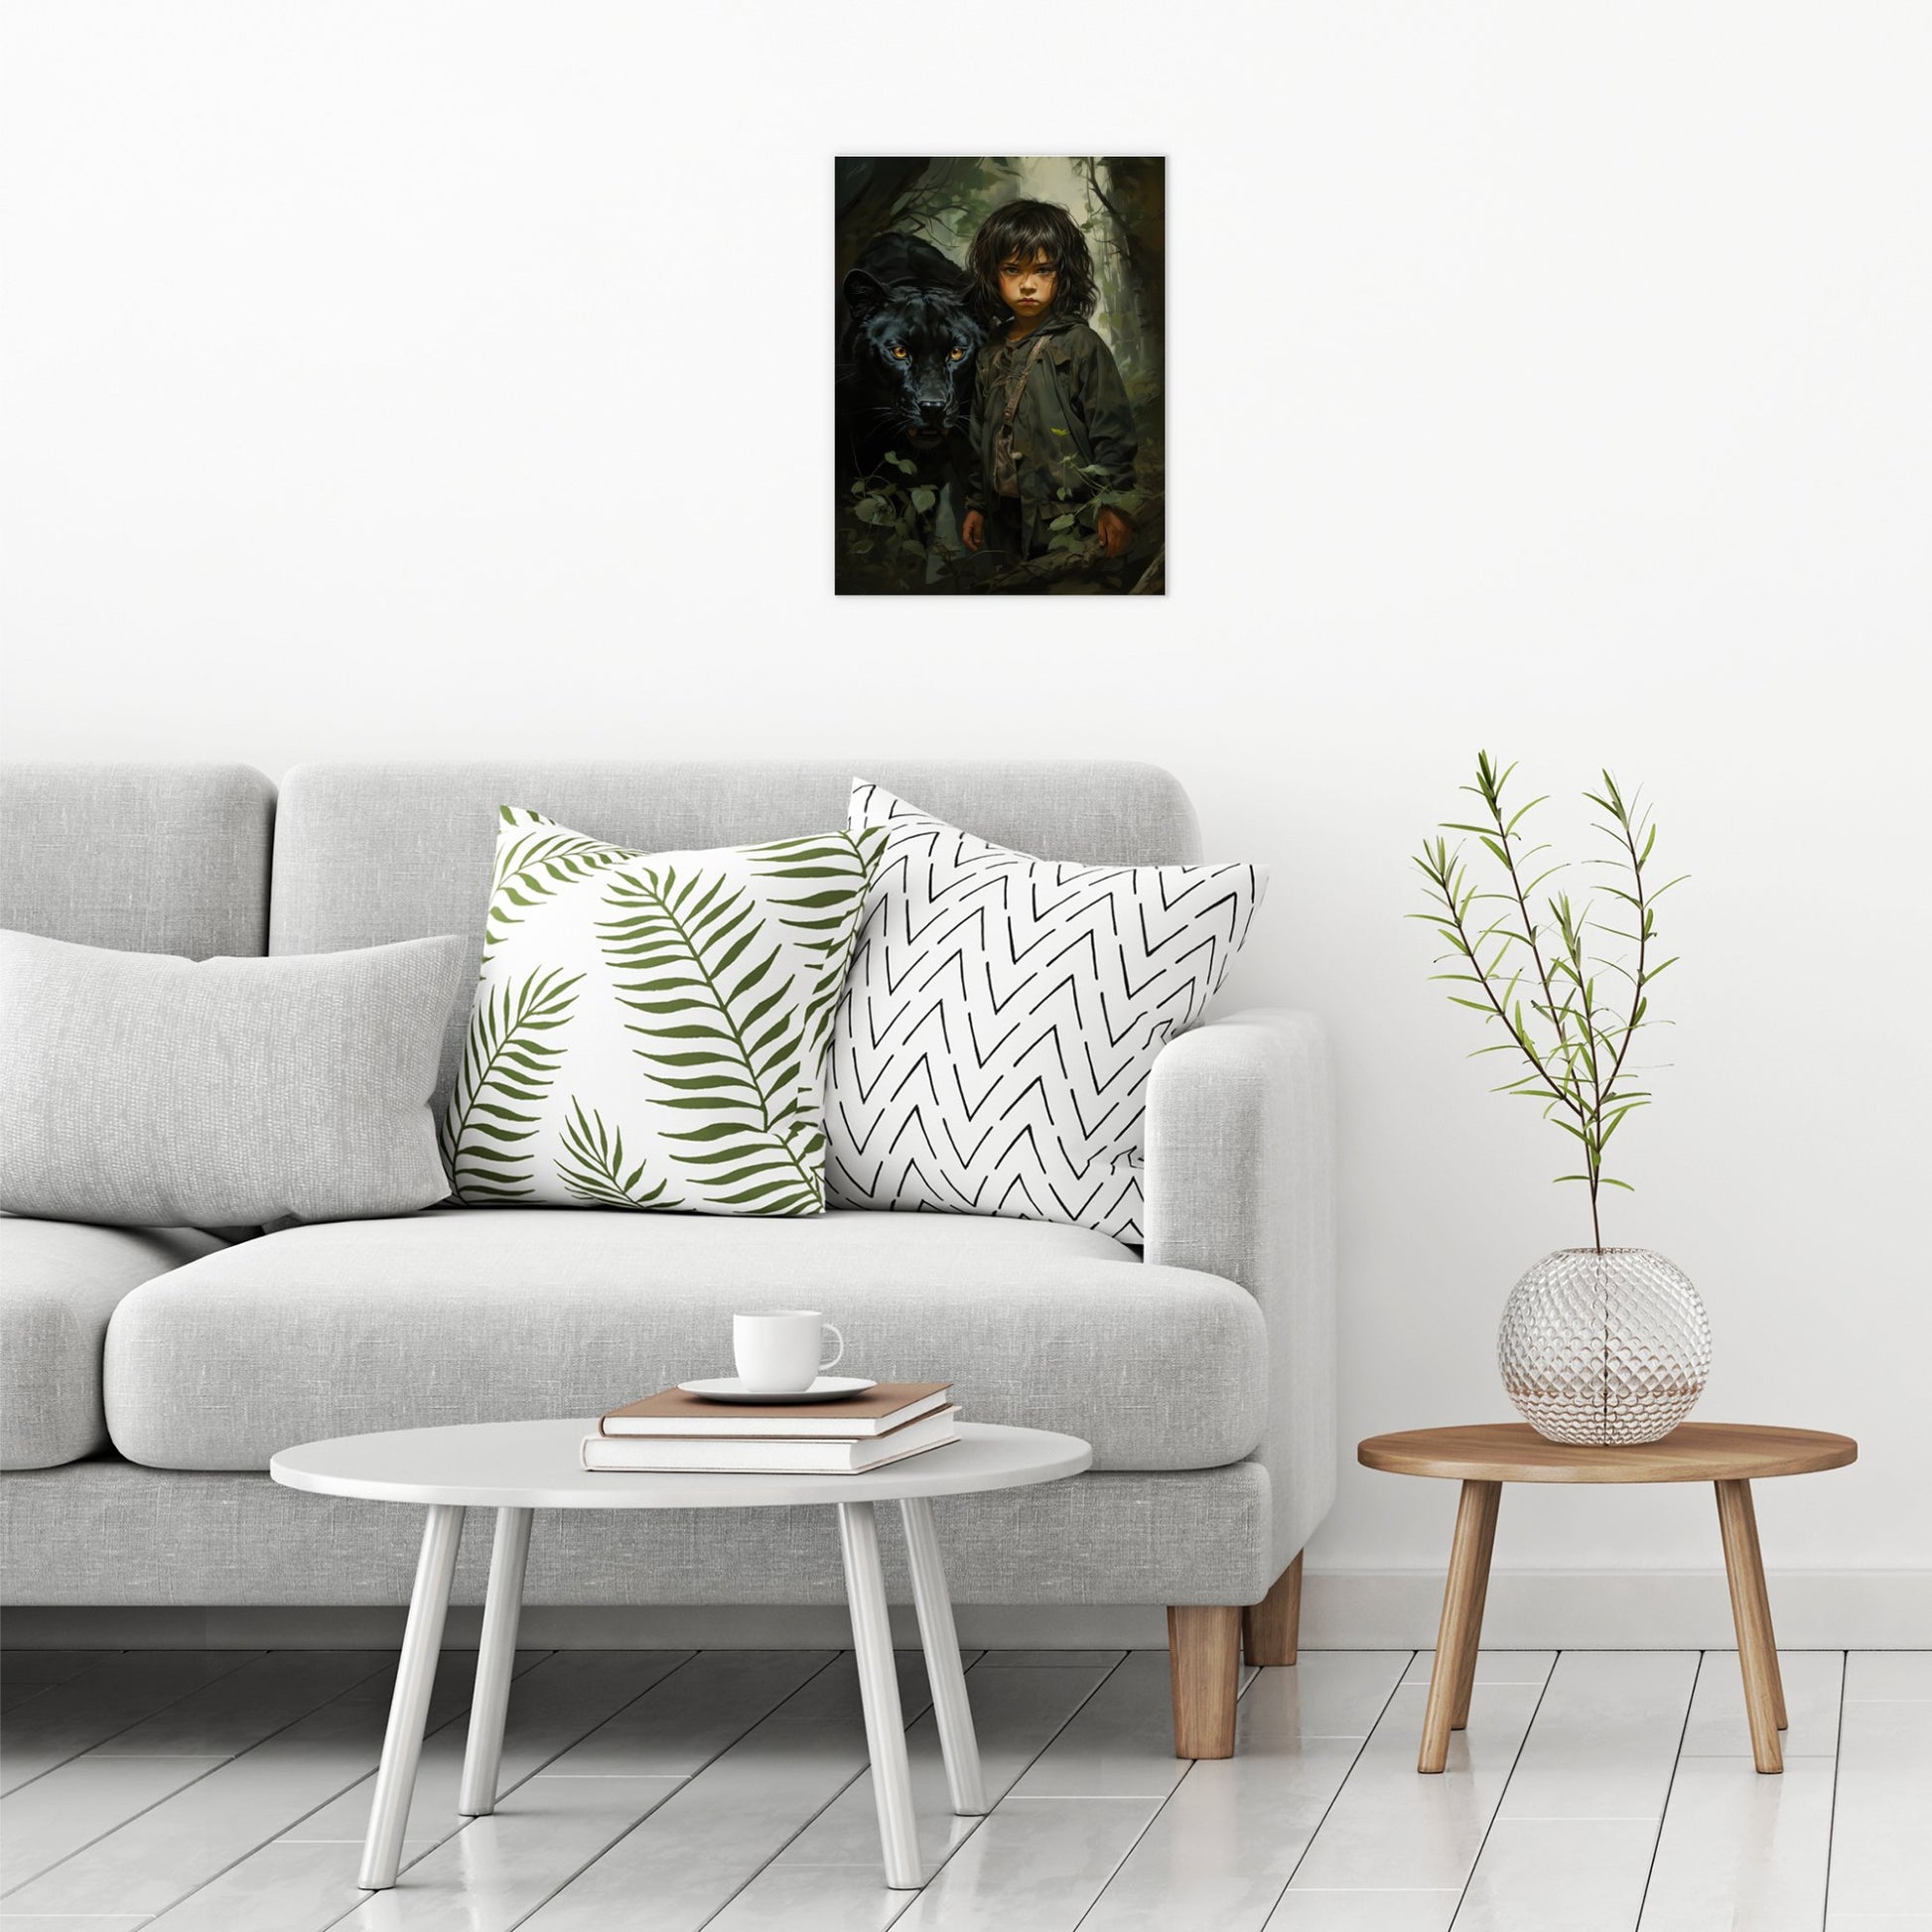 A contemporary modern room view showing a medium size metal art poster display plate with printed design of a Boy and Black Panther Fantasy Painting